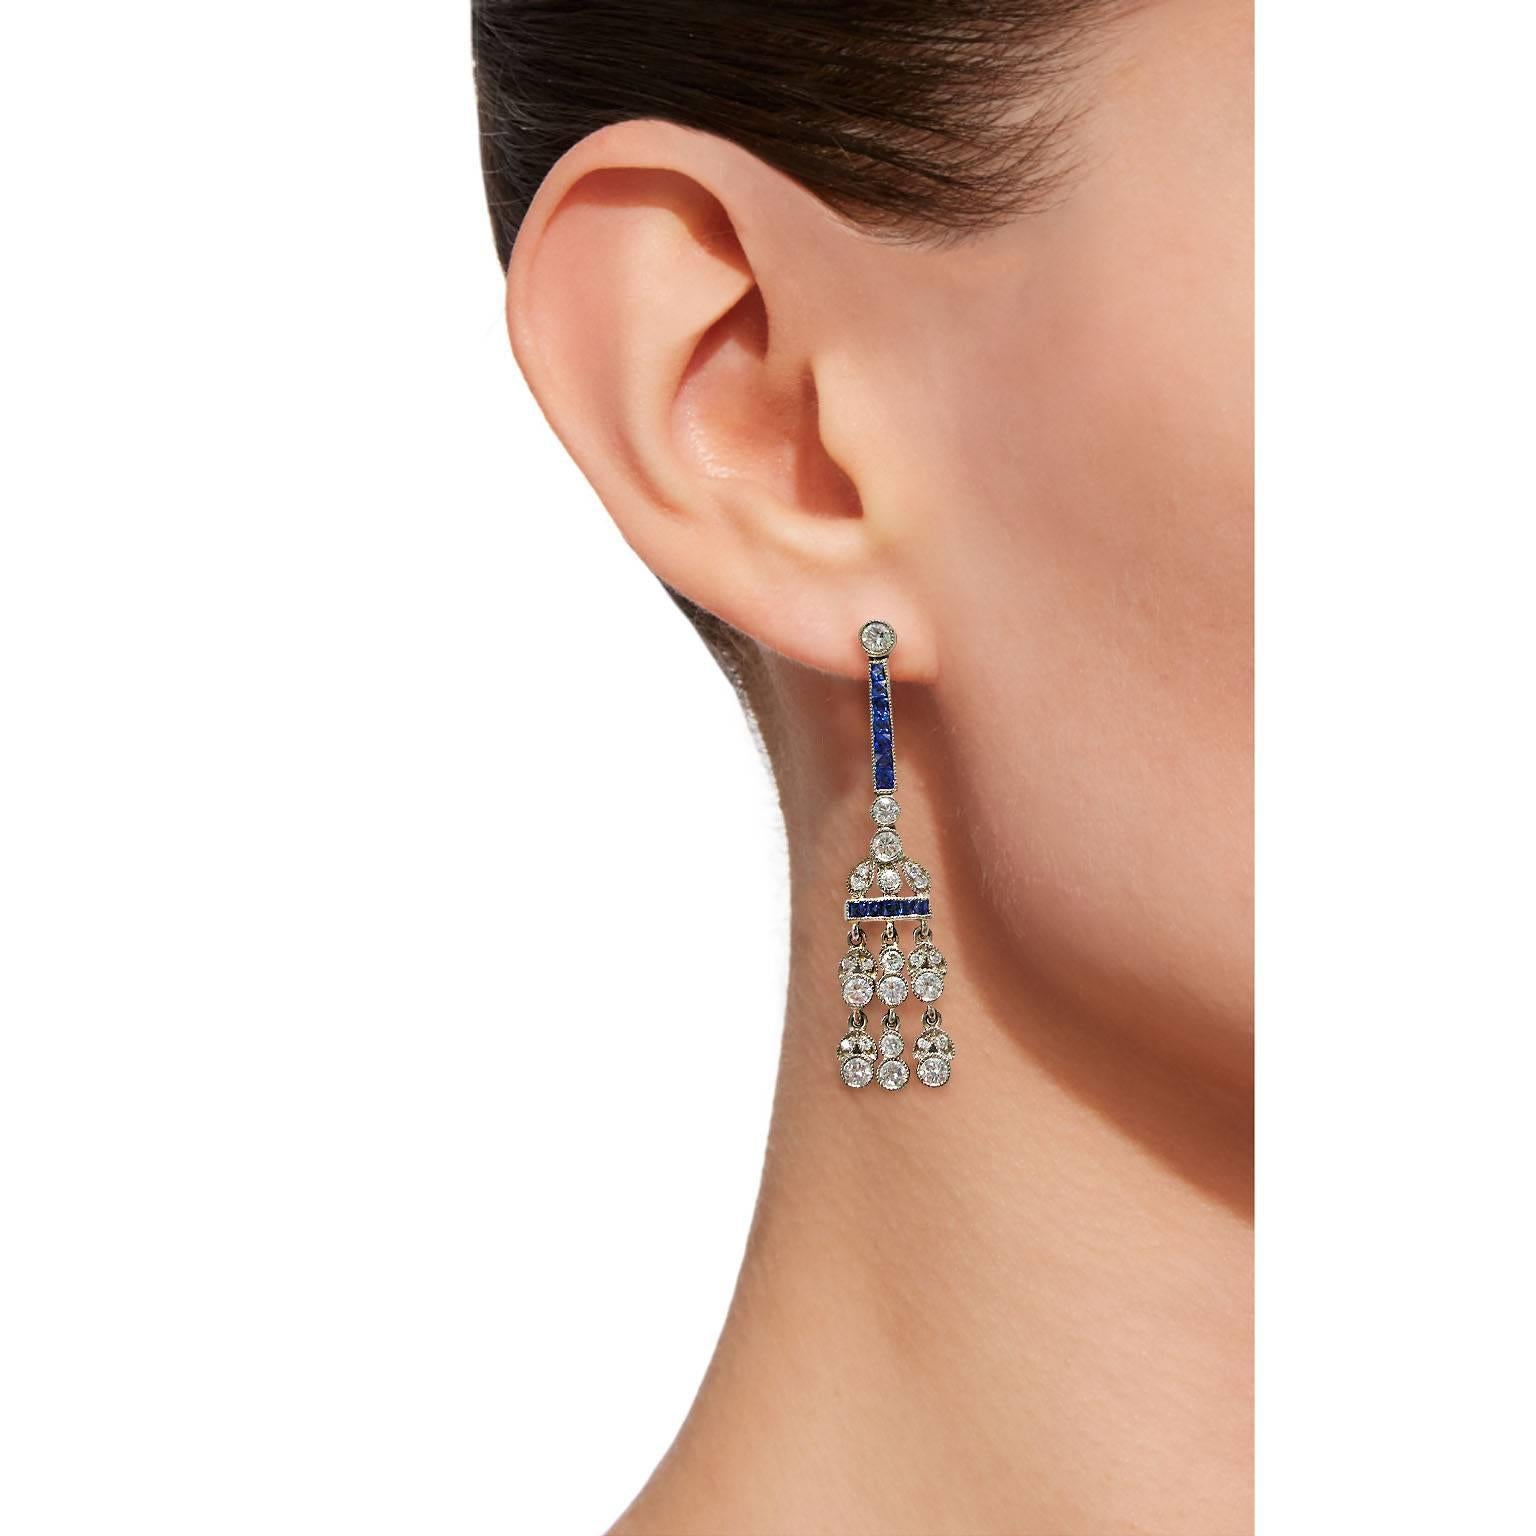 Jona design collection, hand crafted in Italy, platinum dangling chandelier earrings, set with 1.02 carats of brilliant cut diamonds G Color, VVS Clarity and 0.93 carats of square cut blue sapphires. 

All Jona jewelry is new and has never been